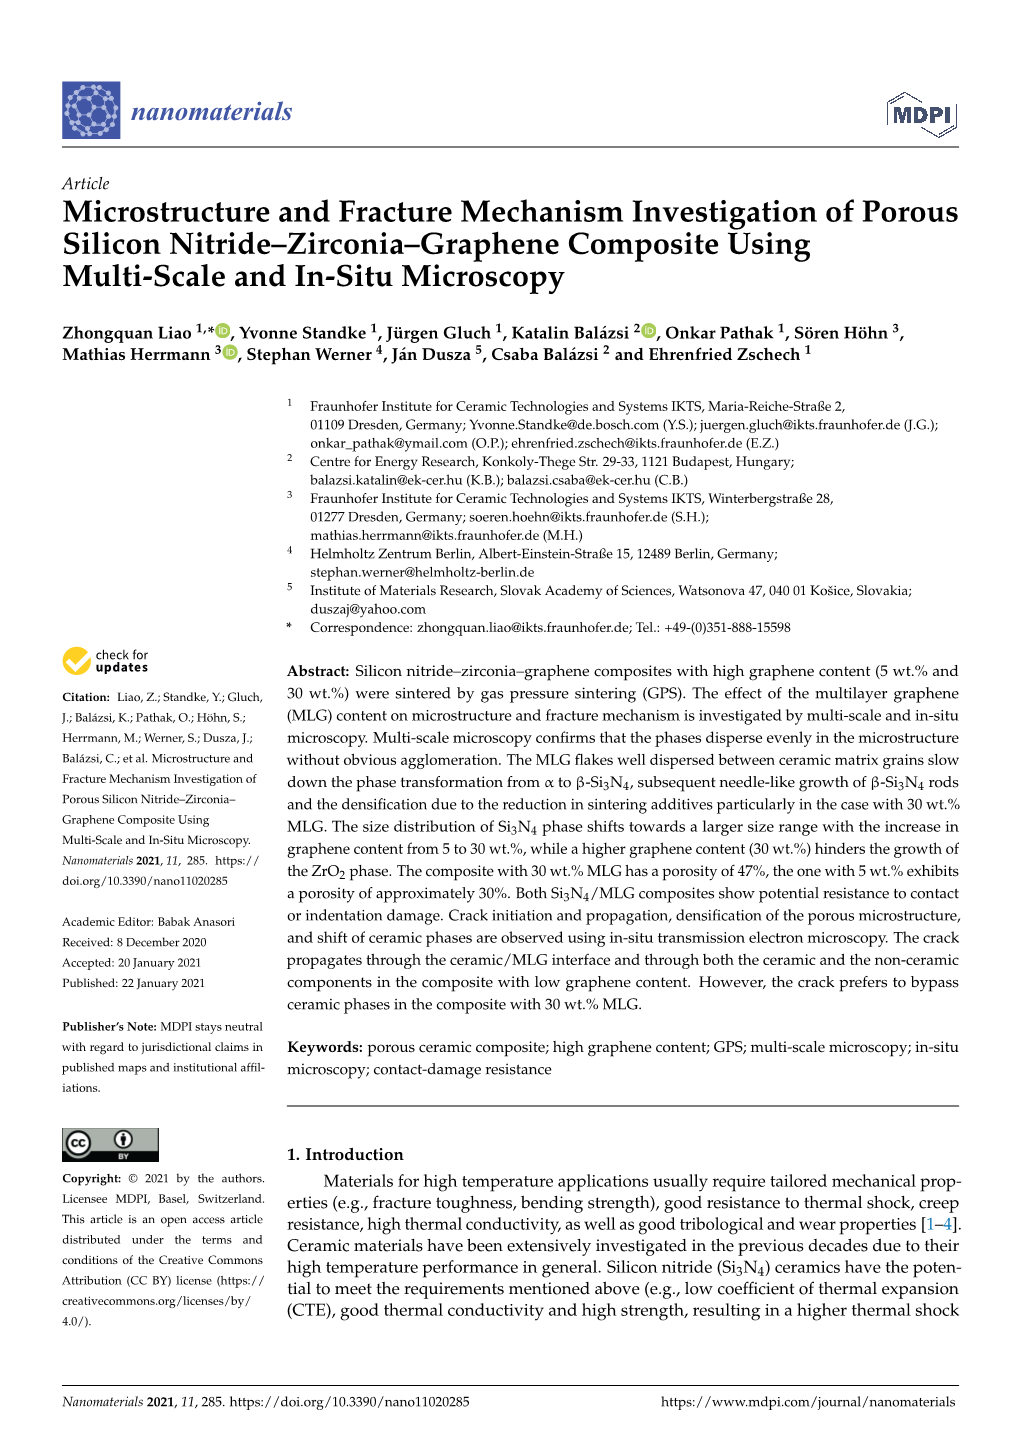 Microstructure and Fracture Mechanism Investigation of Porous Silicon Nitride–Zirconia–Graphene Composite Using Multi-Scale and In-Situ Microscopy